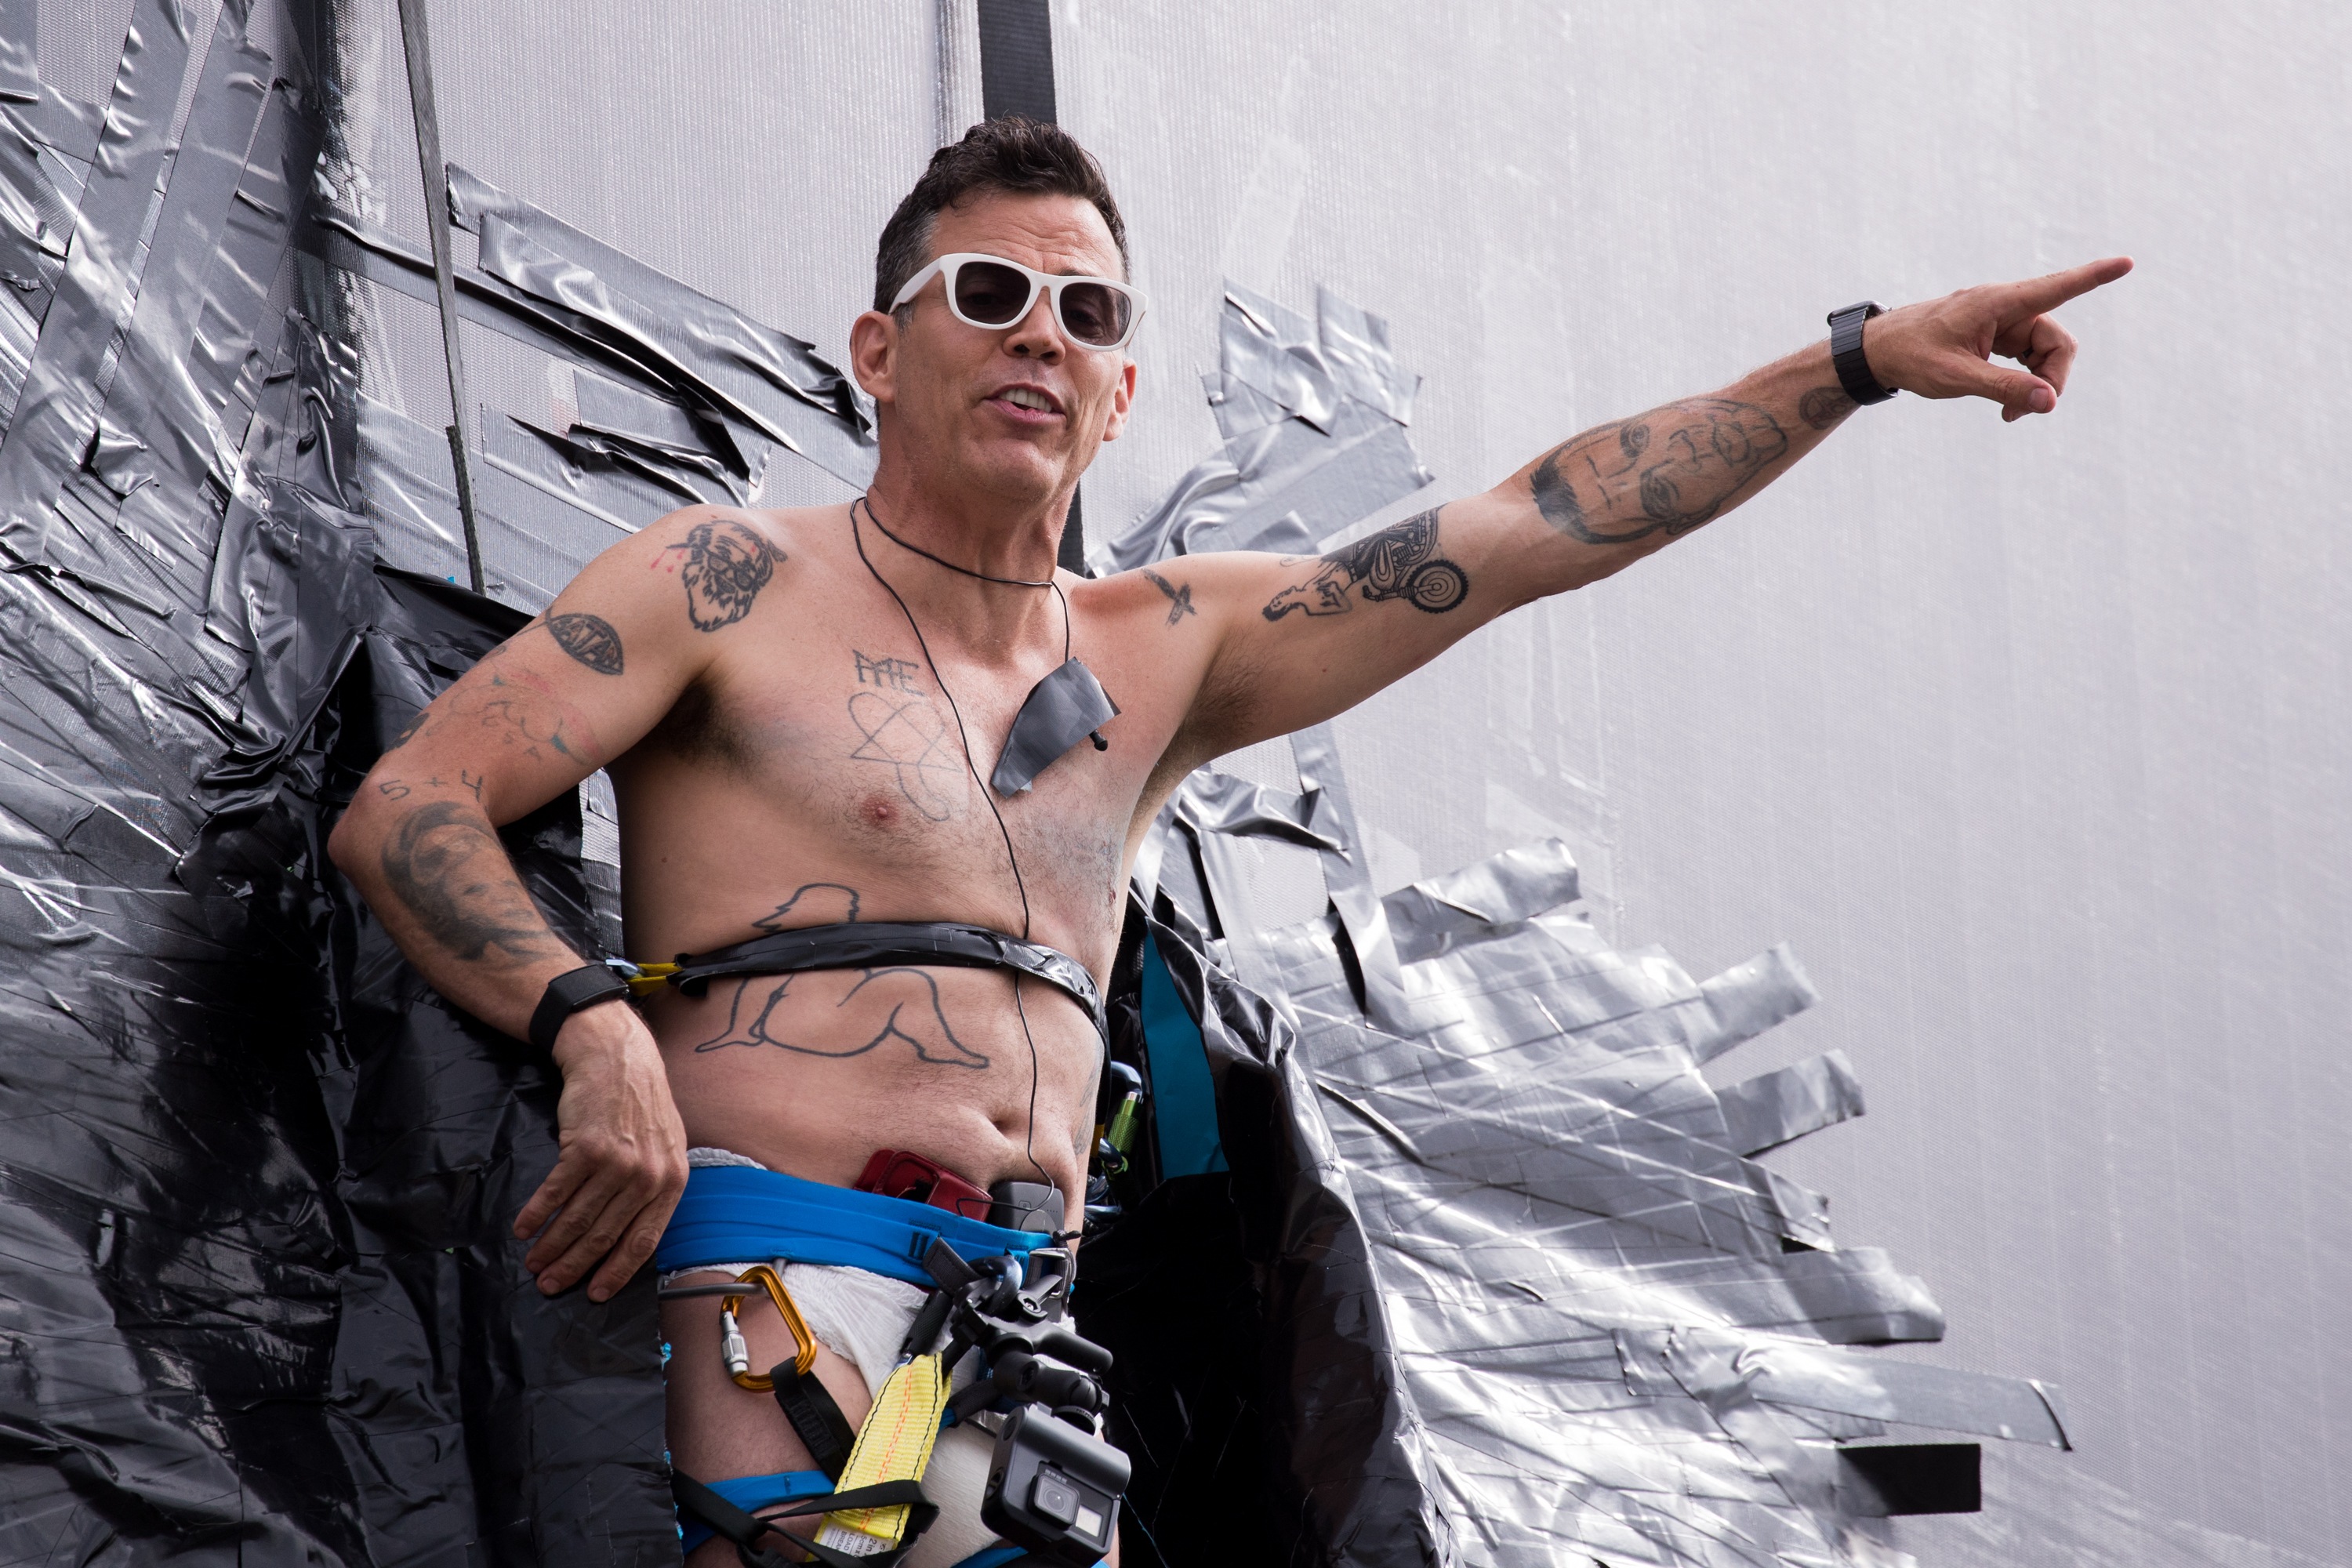 Steve-O Admits “Jackass” Was “Worth Vilifying” For Being A “Bad Influence”